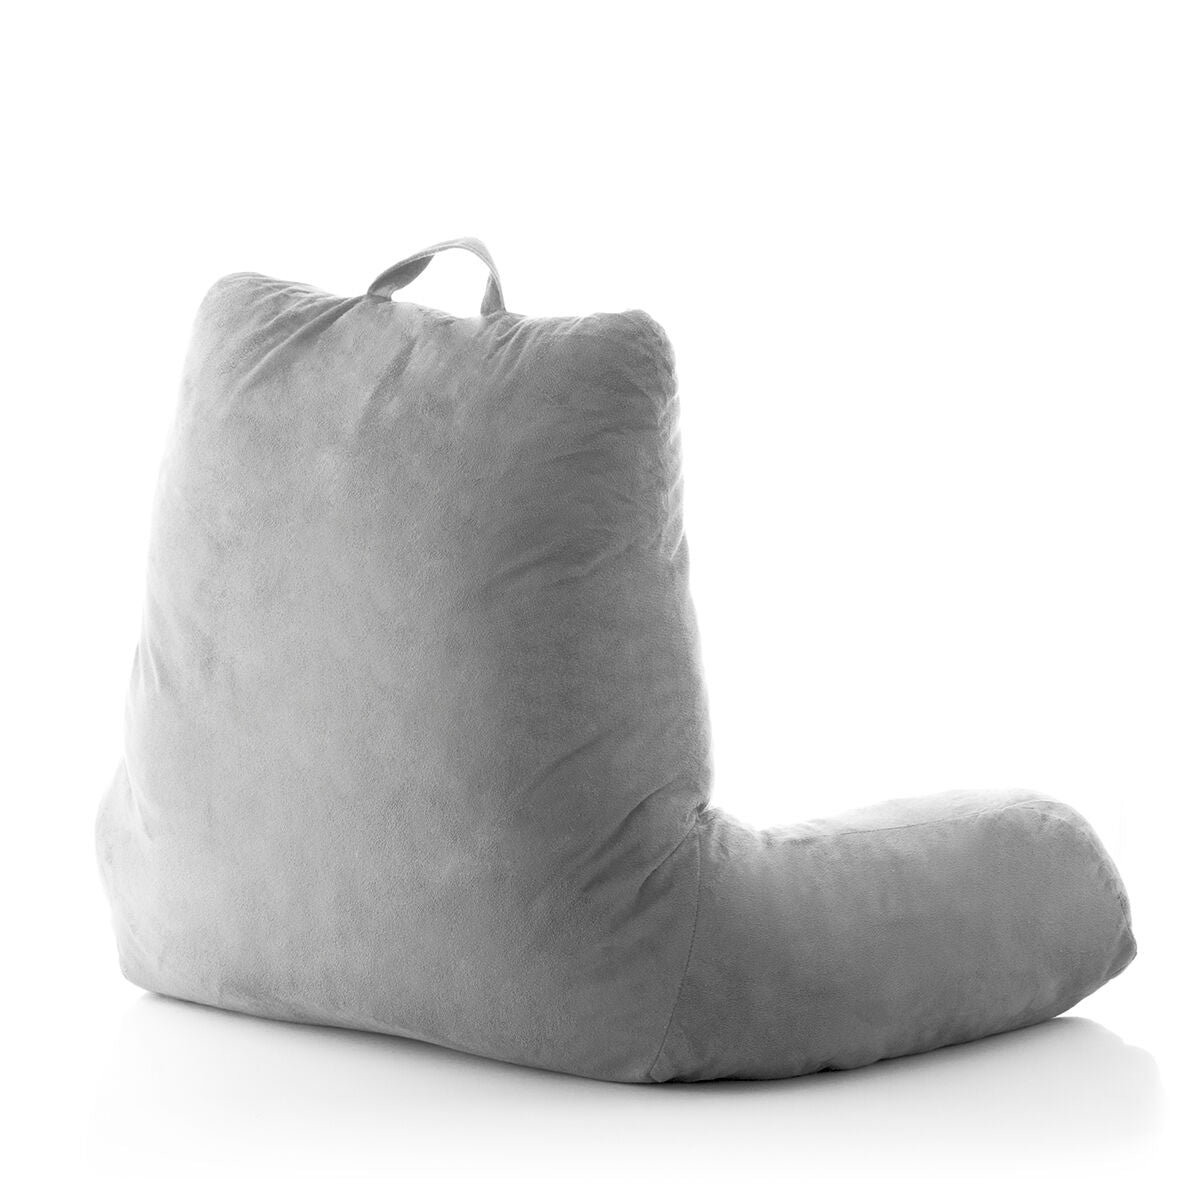 Reading Pillow with Armrests Huglow InnovaGoods